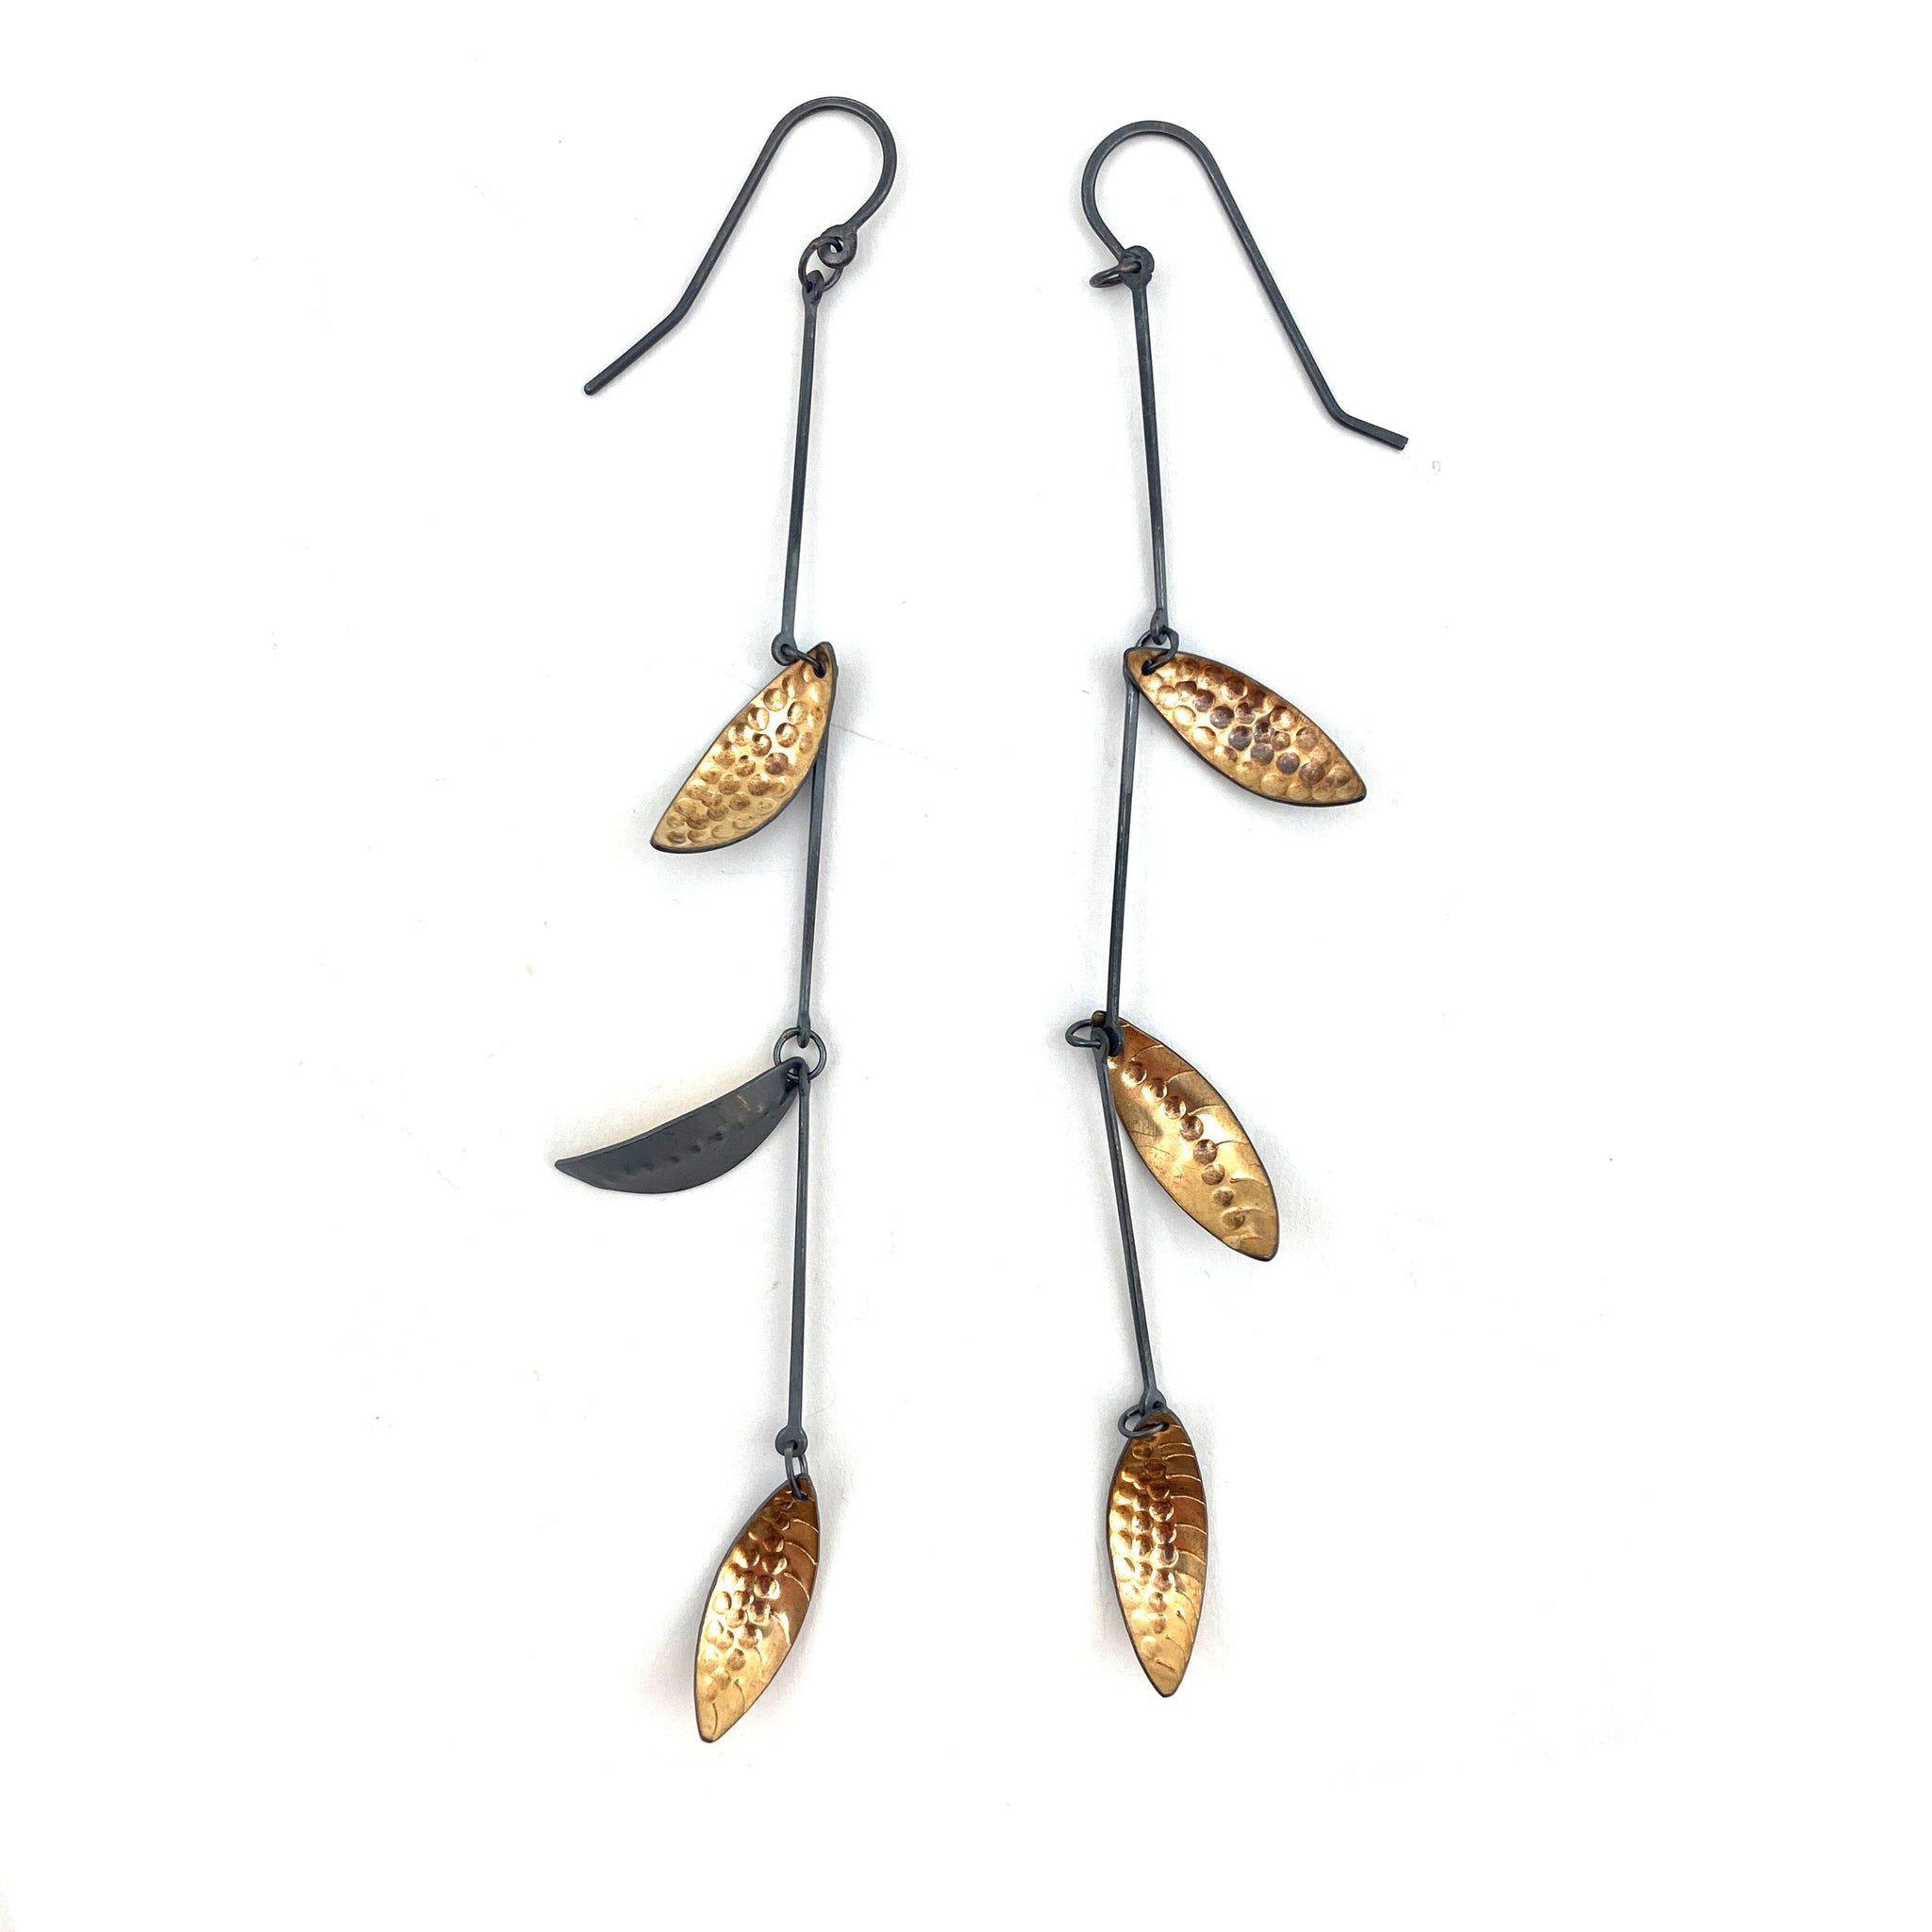 Small Monstera Leaf Earrings - SilverBotanica - Handmade Jewelry designed  by Alicia Hanson and Hi Octane Industries Inc. | Botanical Inspired Jewelry  and Clothing